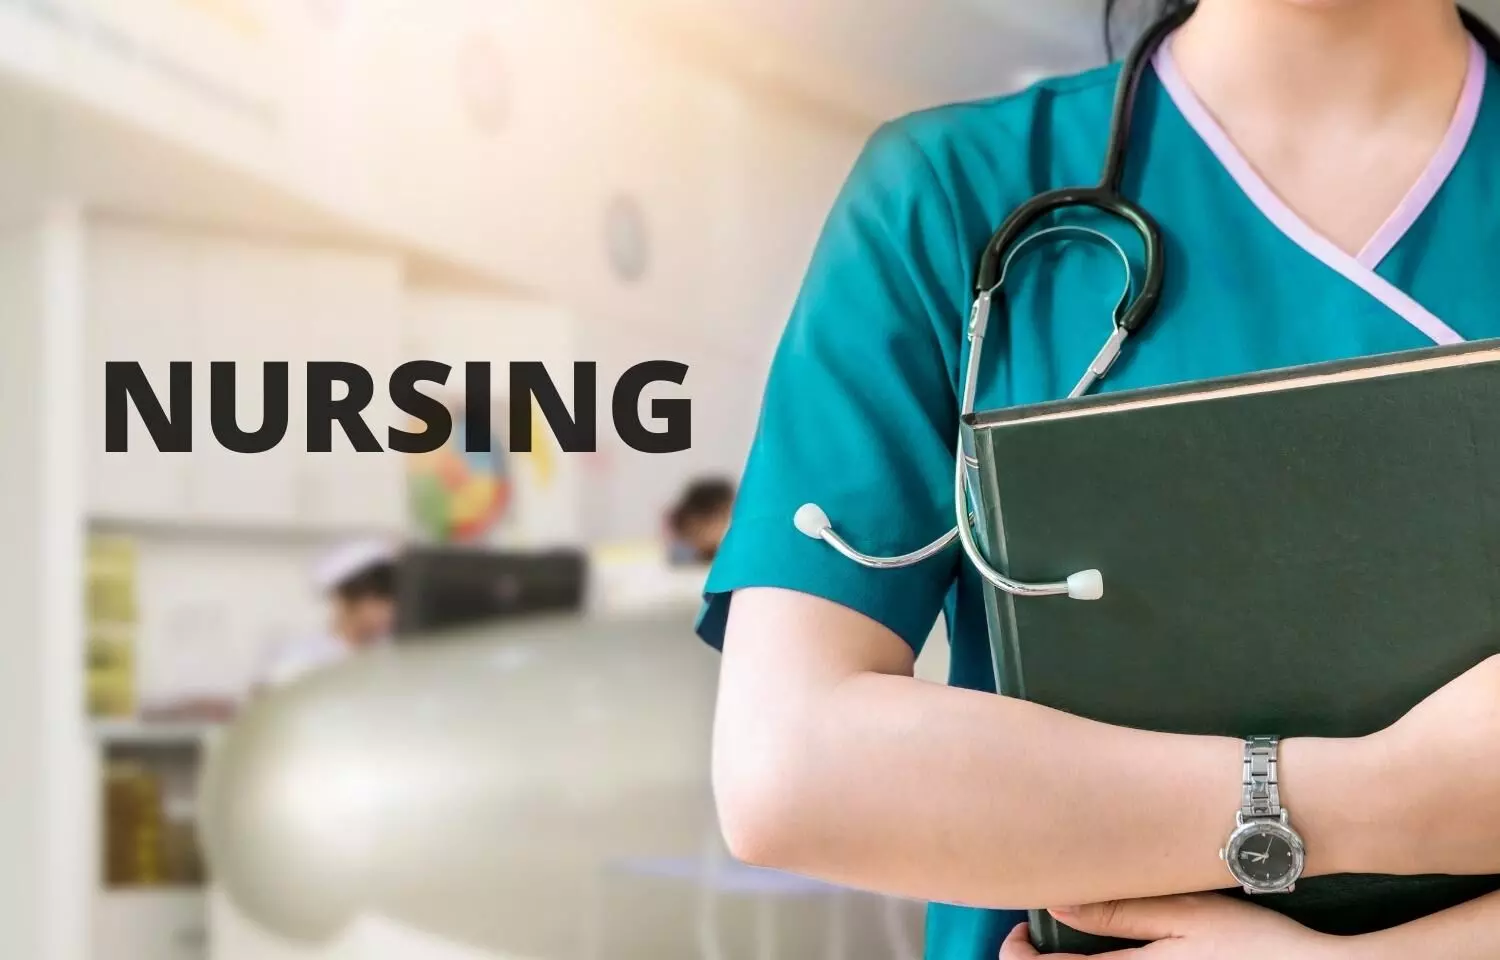 AIIMS publishes Revised Schedule Of BSc Nursing Professional Exams, Details